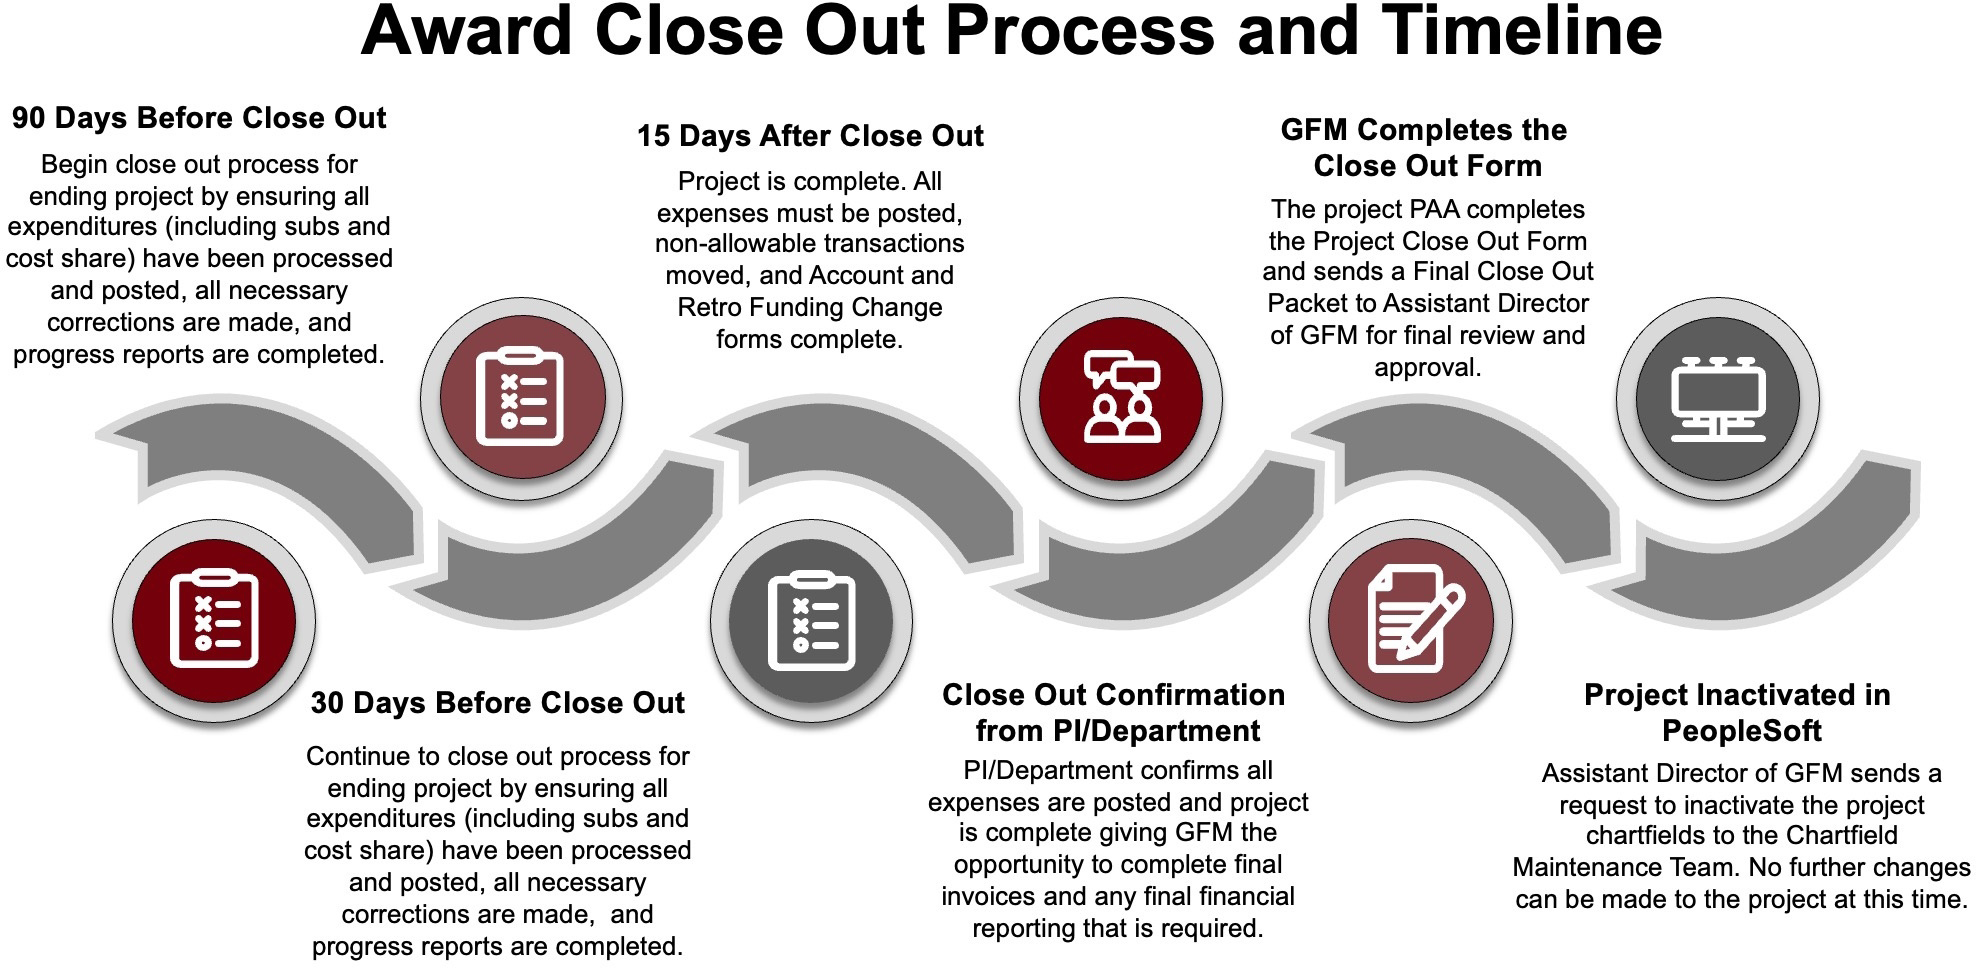 9 Days Before Close Out begin the close out process for ending project by ensuring all expenditures (including subs and cost share) have been processed and posted, all necessary corrections are made, and progress reports are completed. 30 Days Before Close Out continue to close out process for ending project by ensuring all expenditures (including subs and cost share) have been processed and posted, all necessary corrections are made,  and progress reports are completed. 15 Days After Close Out the Project is complete. All expenses must be posted, non-allowable transactions moved, and Account and Retro Funding Change. Close Out Confirmation is received from the PI/Department to confirm all expenses are posted and project is complete giving GFM the opportunity to complete final invoices and any final financial reporting that is required. GFM Completes the Close Out Form and sends a Final Close Out Packet to Assistant Director of GFM for final review and approval. Lastly, the Assistant Director of GFM sends a request to inactivate the project chartfields to the Chartfield Maintenance Team. No further changes can be made to the project at this time.